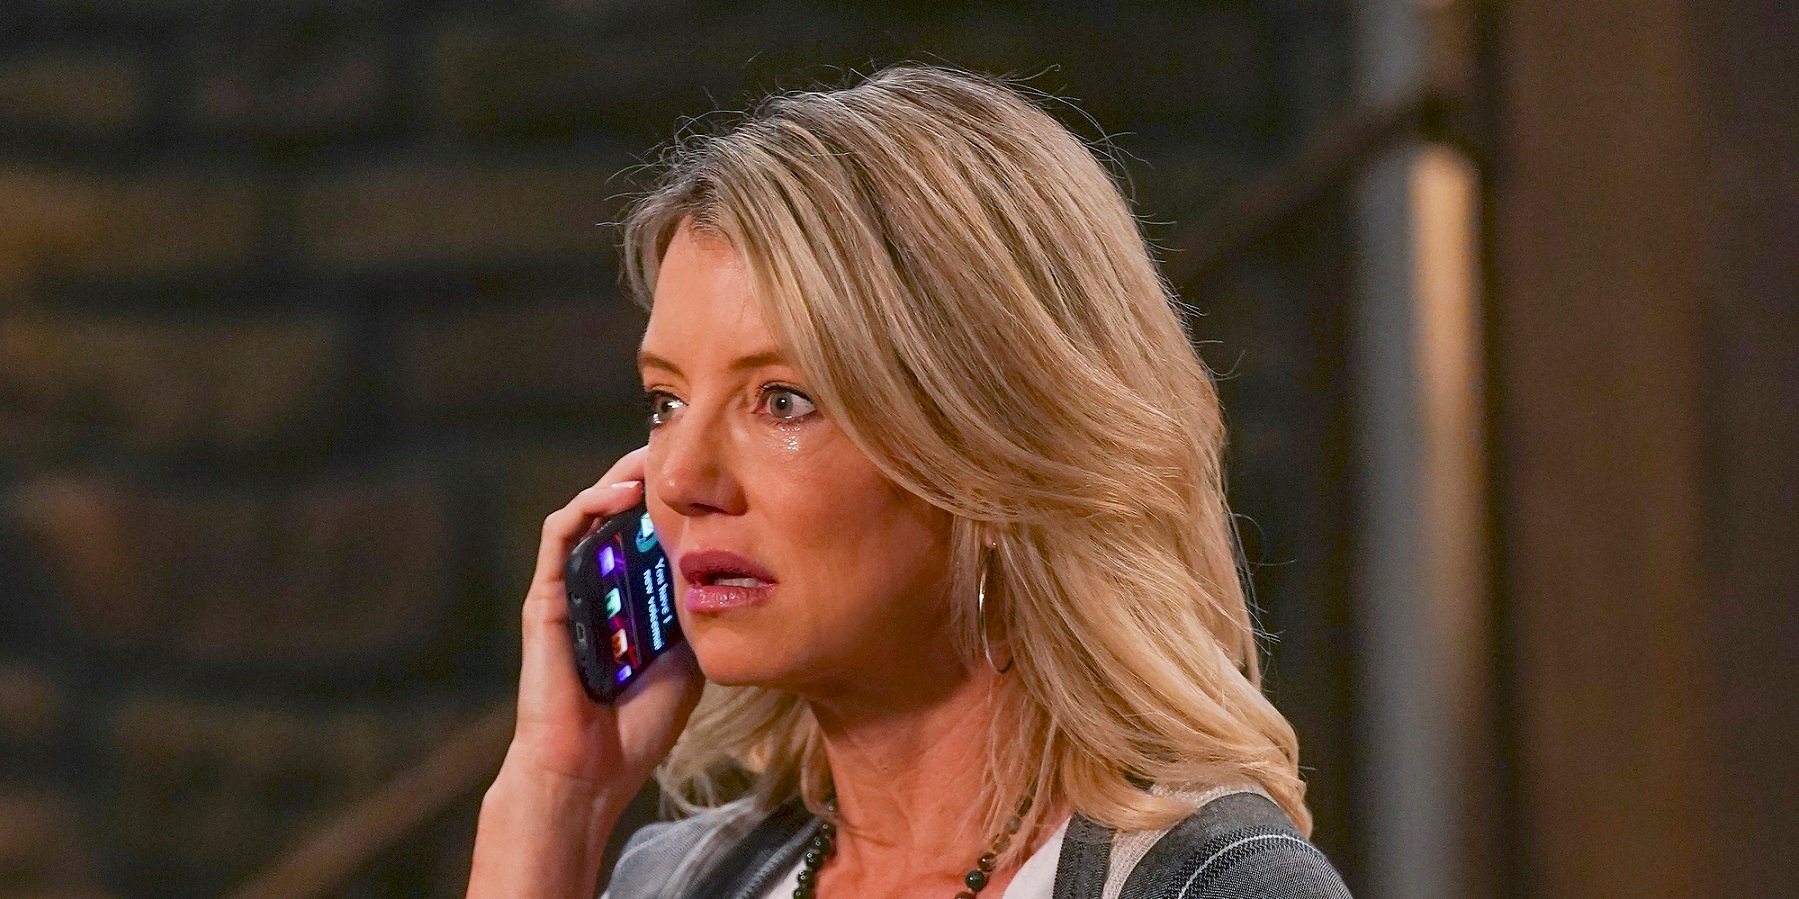 The latest General Hospital speculation focuses on Nina, played by Cynthia Watros, pictured here